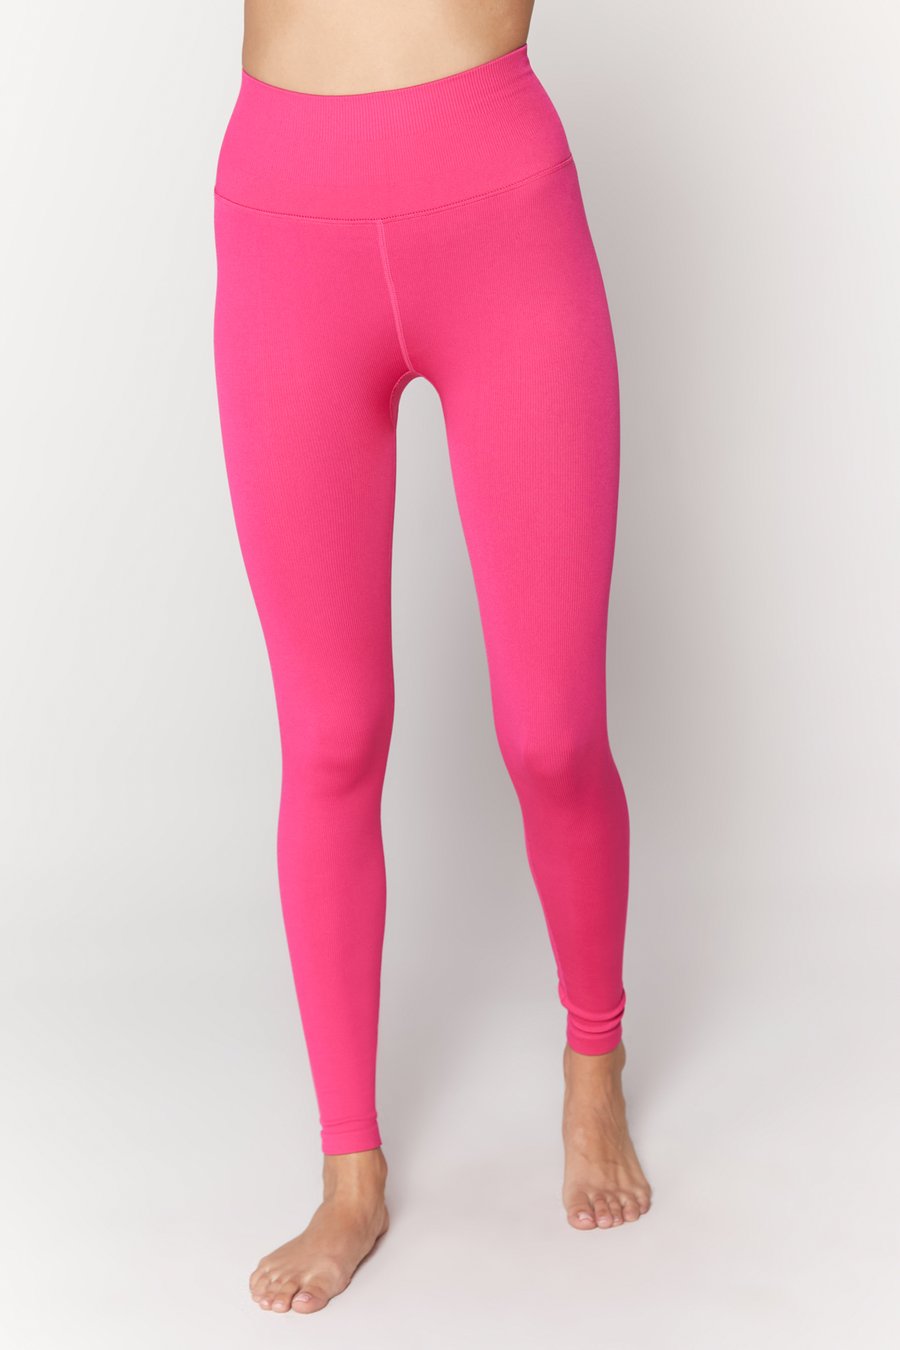 UNIKONCEPT Lifestyle Boutique and Lounge; Spiritual Gangster Love Sculpt Legging in Raspberry